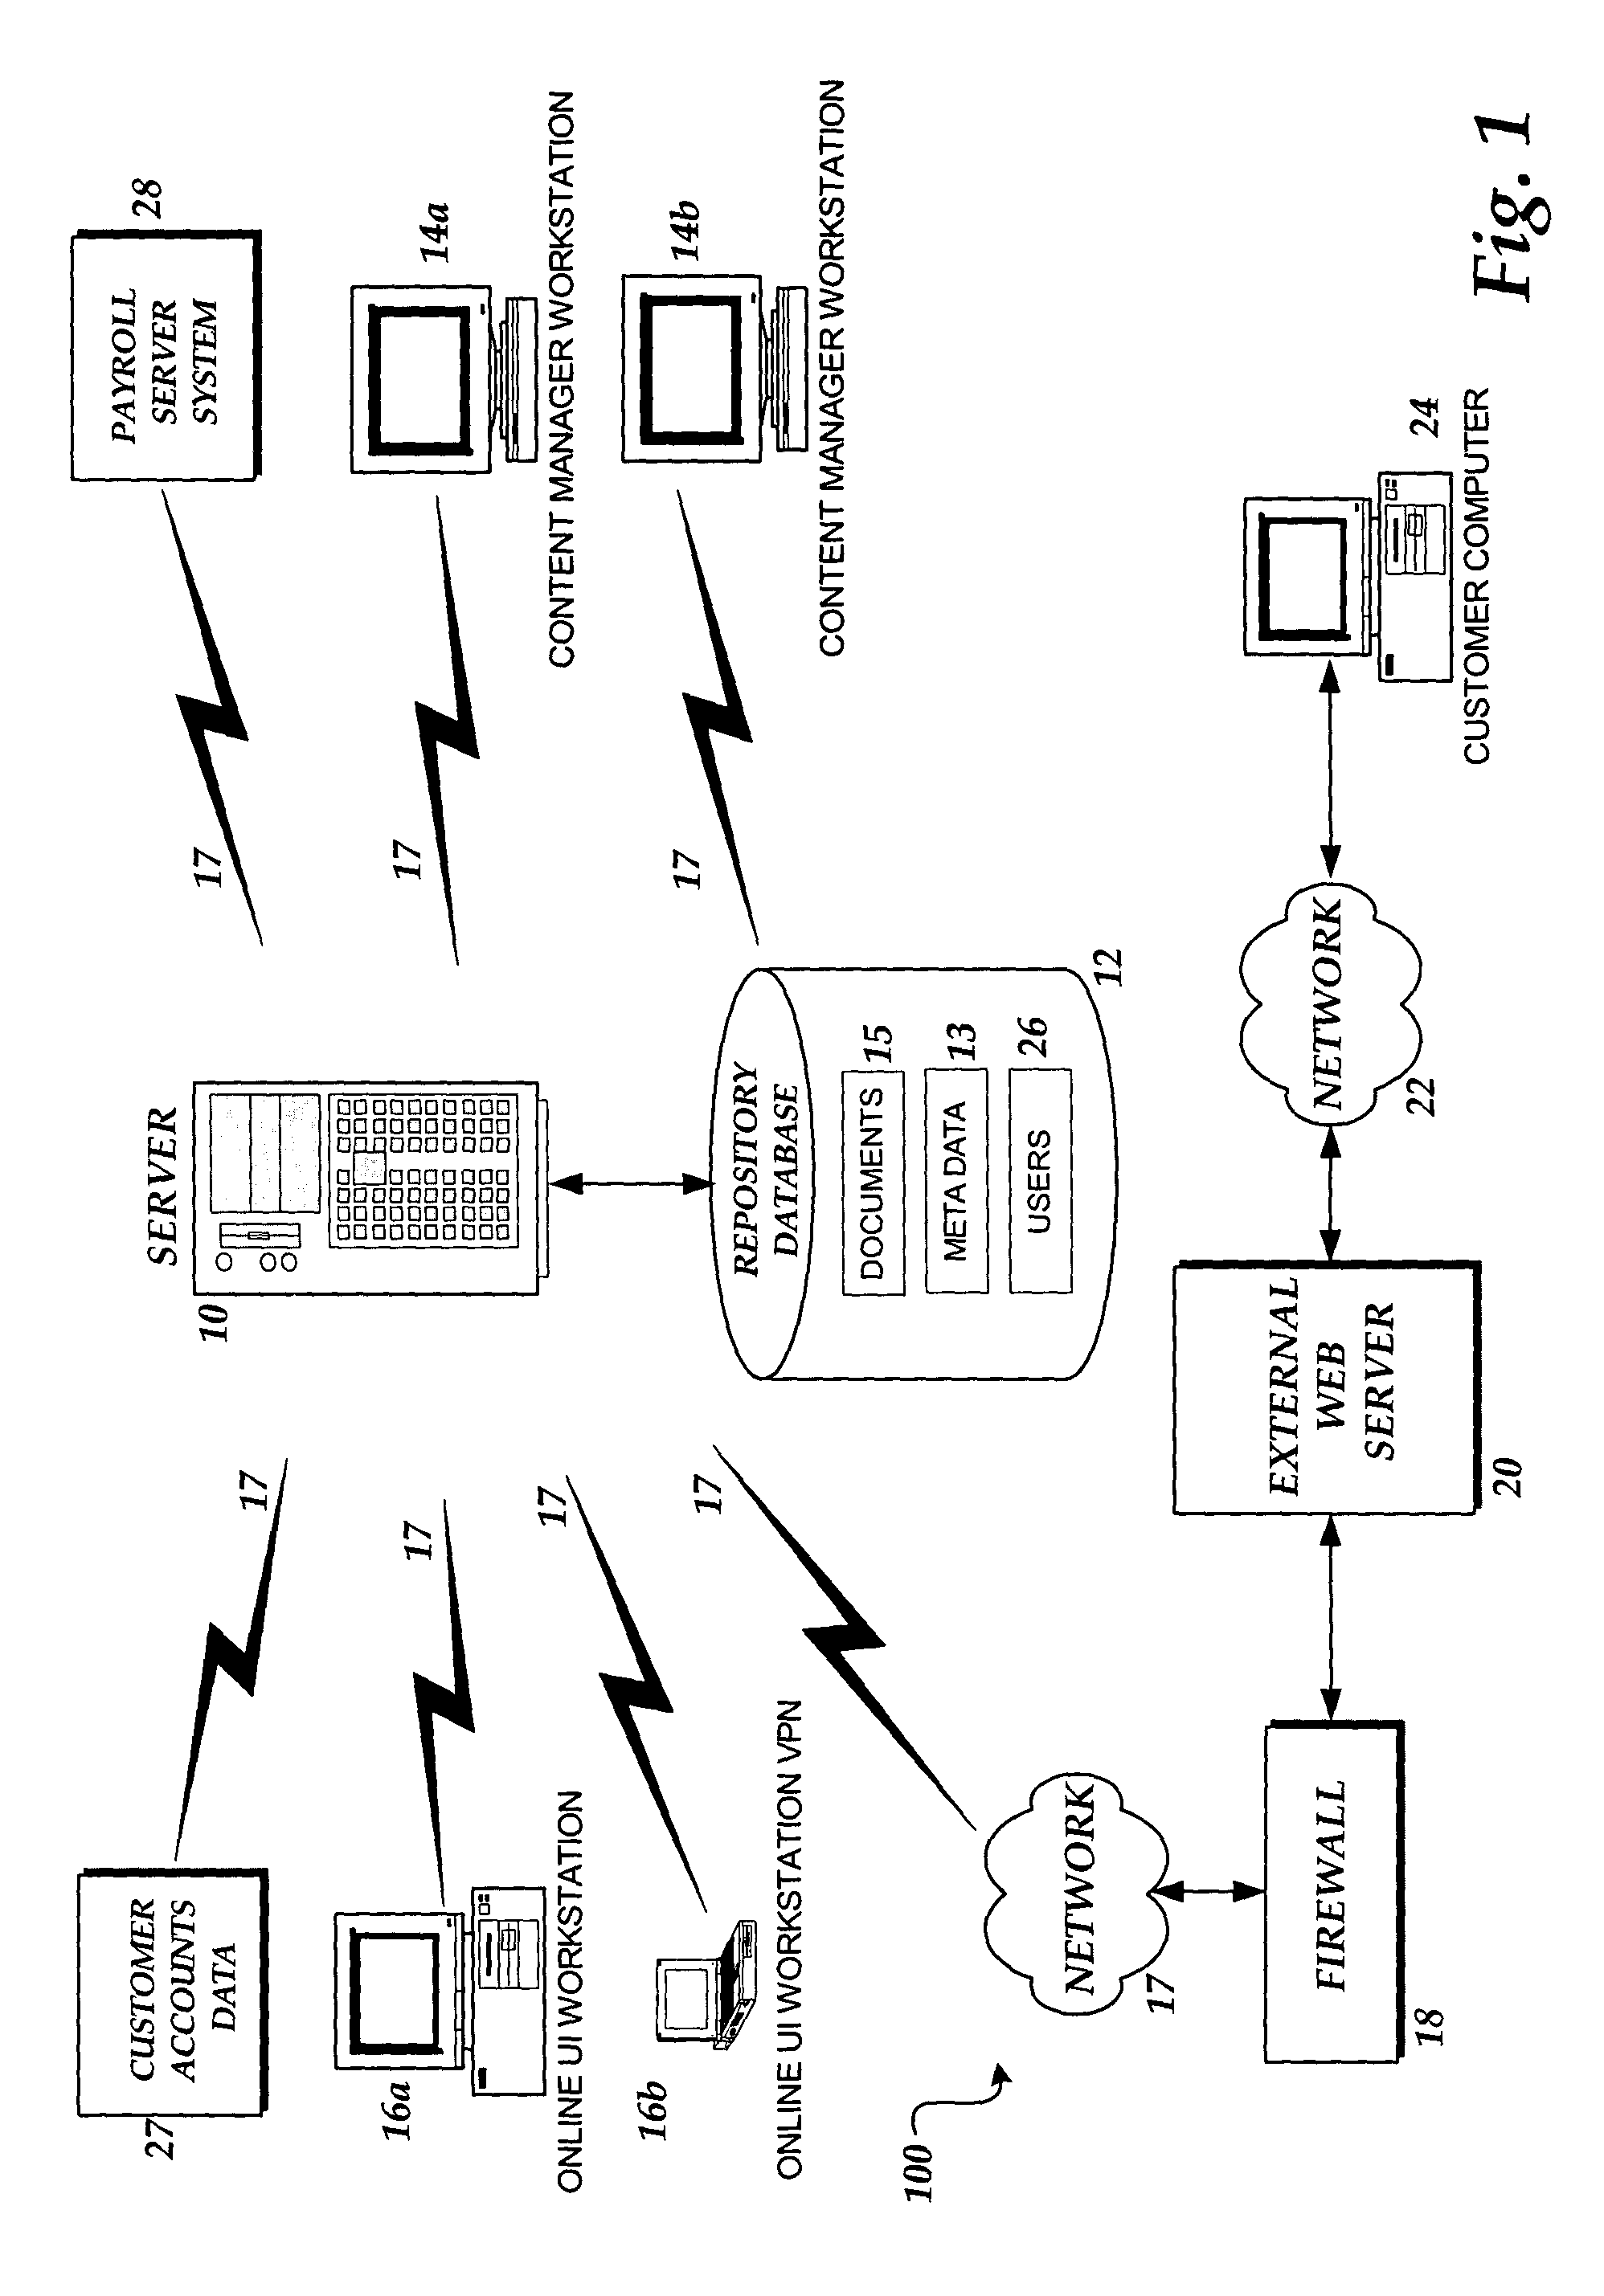 Method and system for data aggregation and retrieval